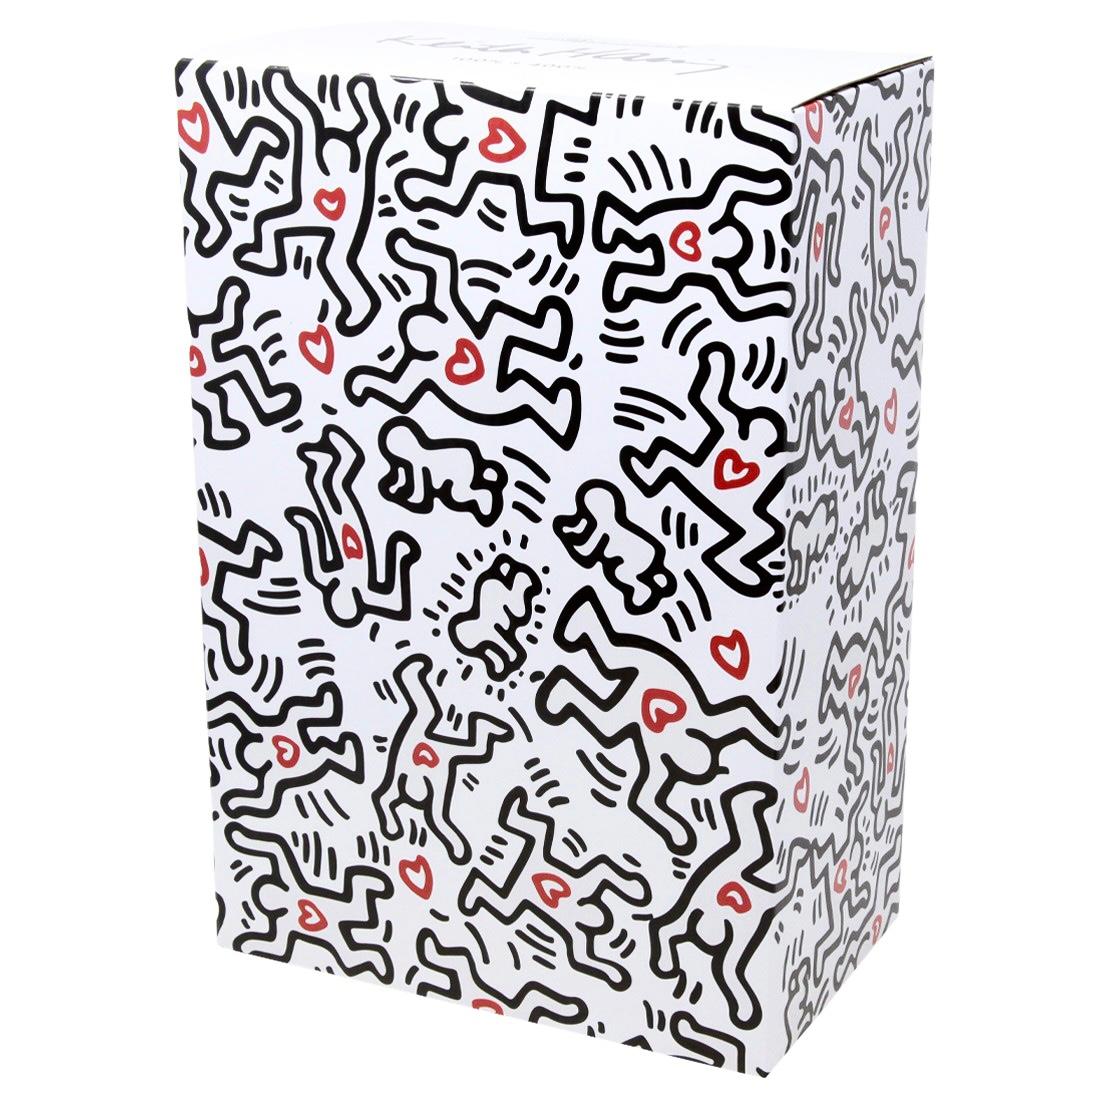 Keith Haring Bearbrick 400% art toy  (Keith Haring BE@RBRICK)  - Street Art Sculpture by (after) Keith Haring